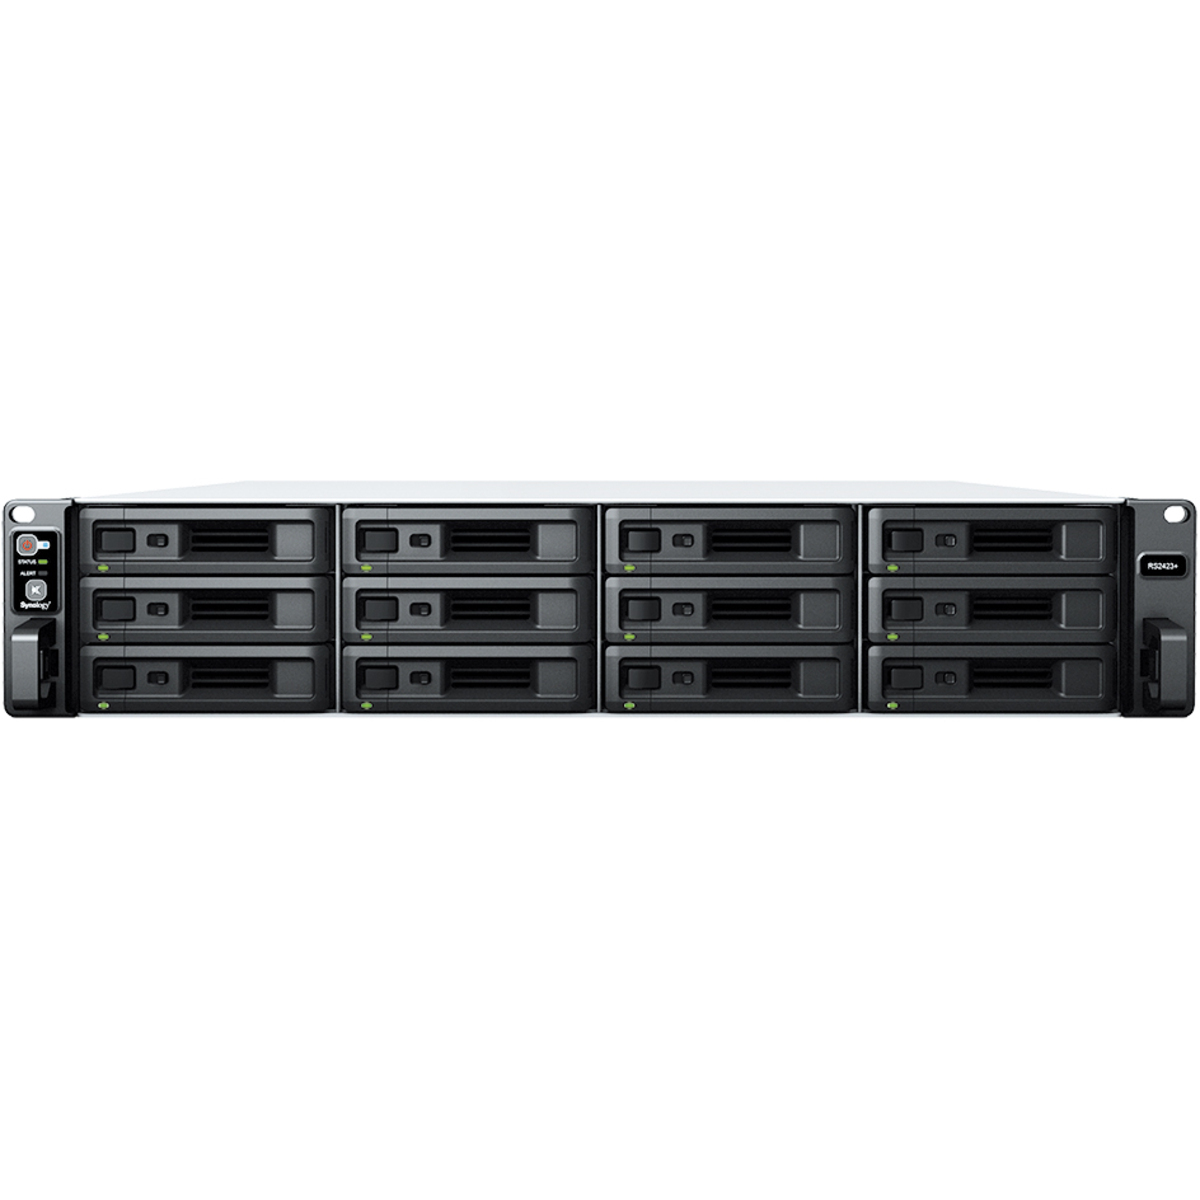 Synology RackStation RS2423RP+ 14tb 12-Bay RackMount Multimedia / Power User / Business NAS - Network Attached Storage Device 7x2tb Samsung 870 QVO MZ-77Q2T0 2.5 560/530MB/s SATA 6Gb/s SSD CONSUMER Class Drives Installed - Burn-In Tested - FREE RAM UPGRADE RackStation RS2423RP+